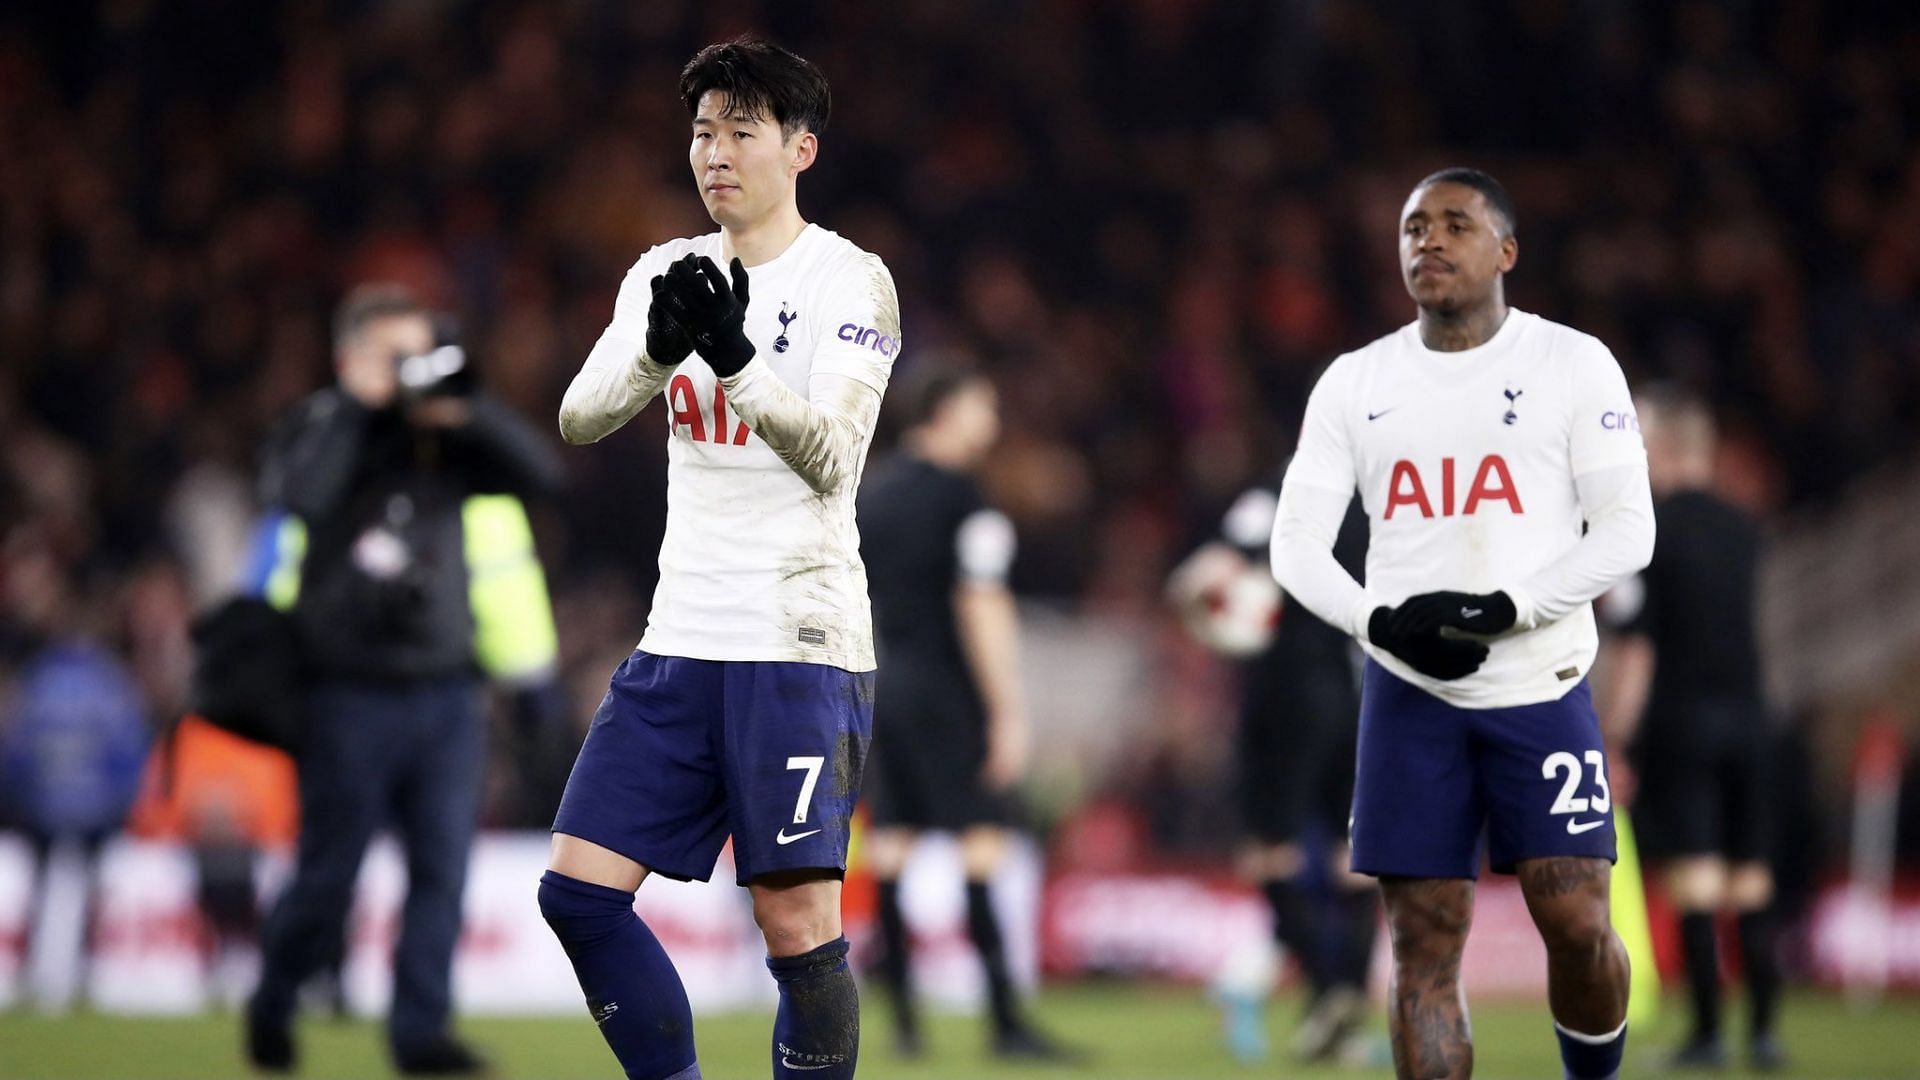 Tottenham are enduring a poor run of form which has been made worse by their FA Cup exit.